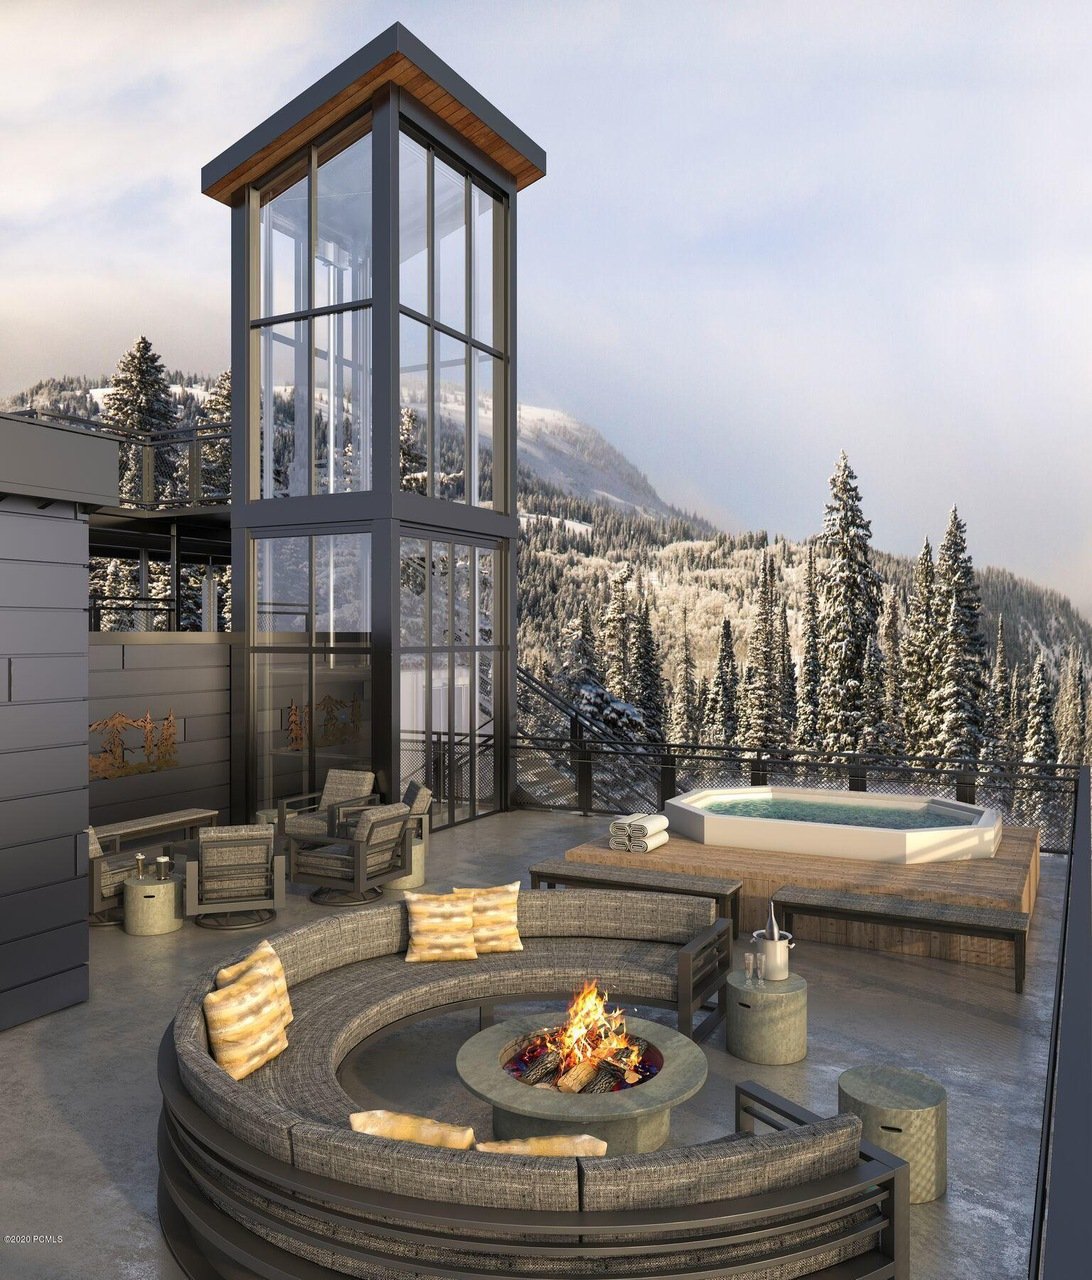 Ski Tower - Communal Patio with Outdoor Seating and Fire Pit, and an Oversized Hot Tub